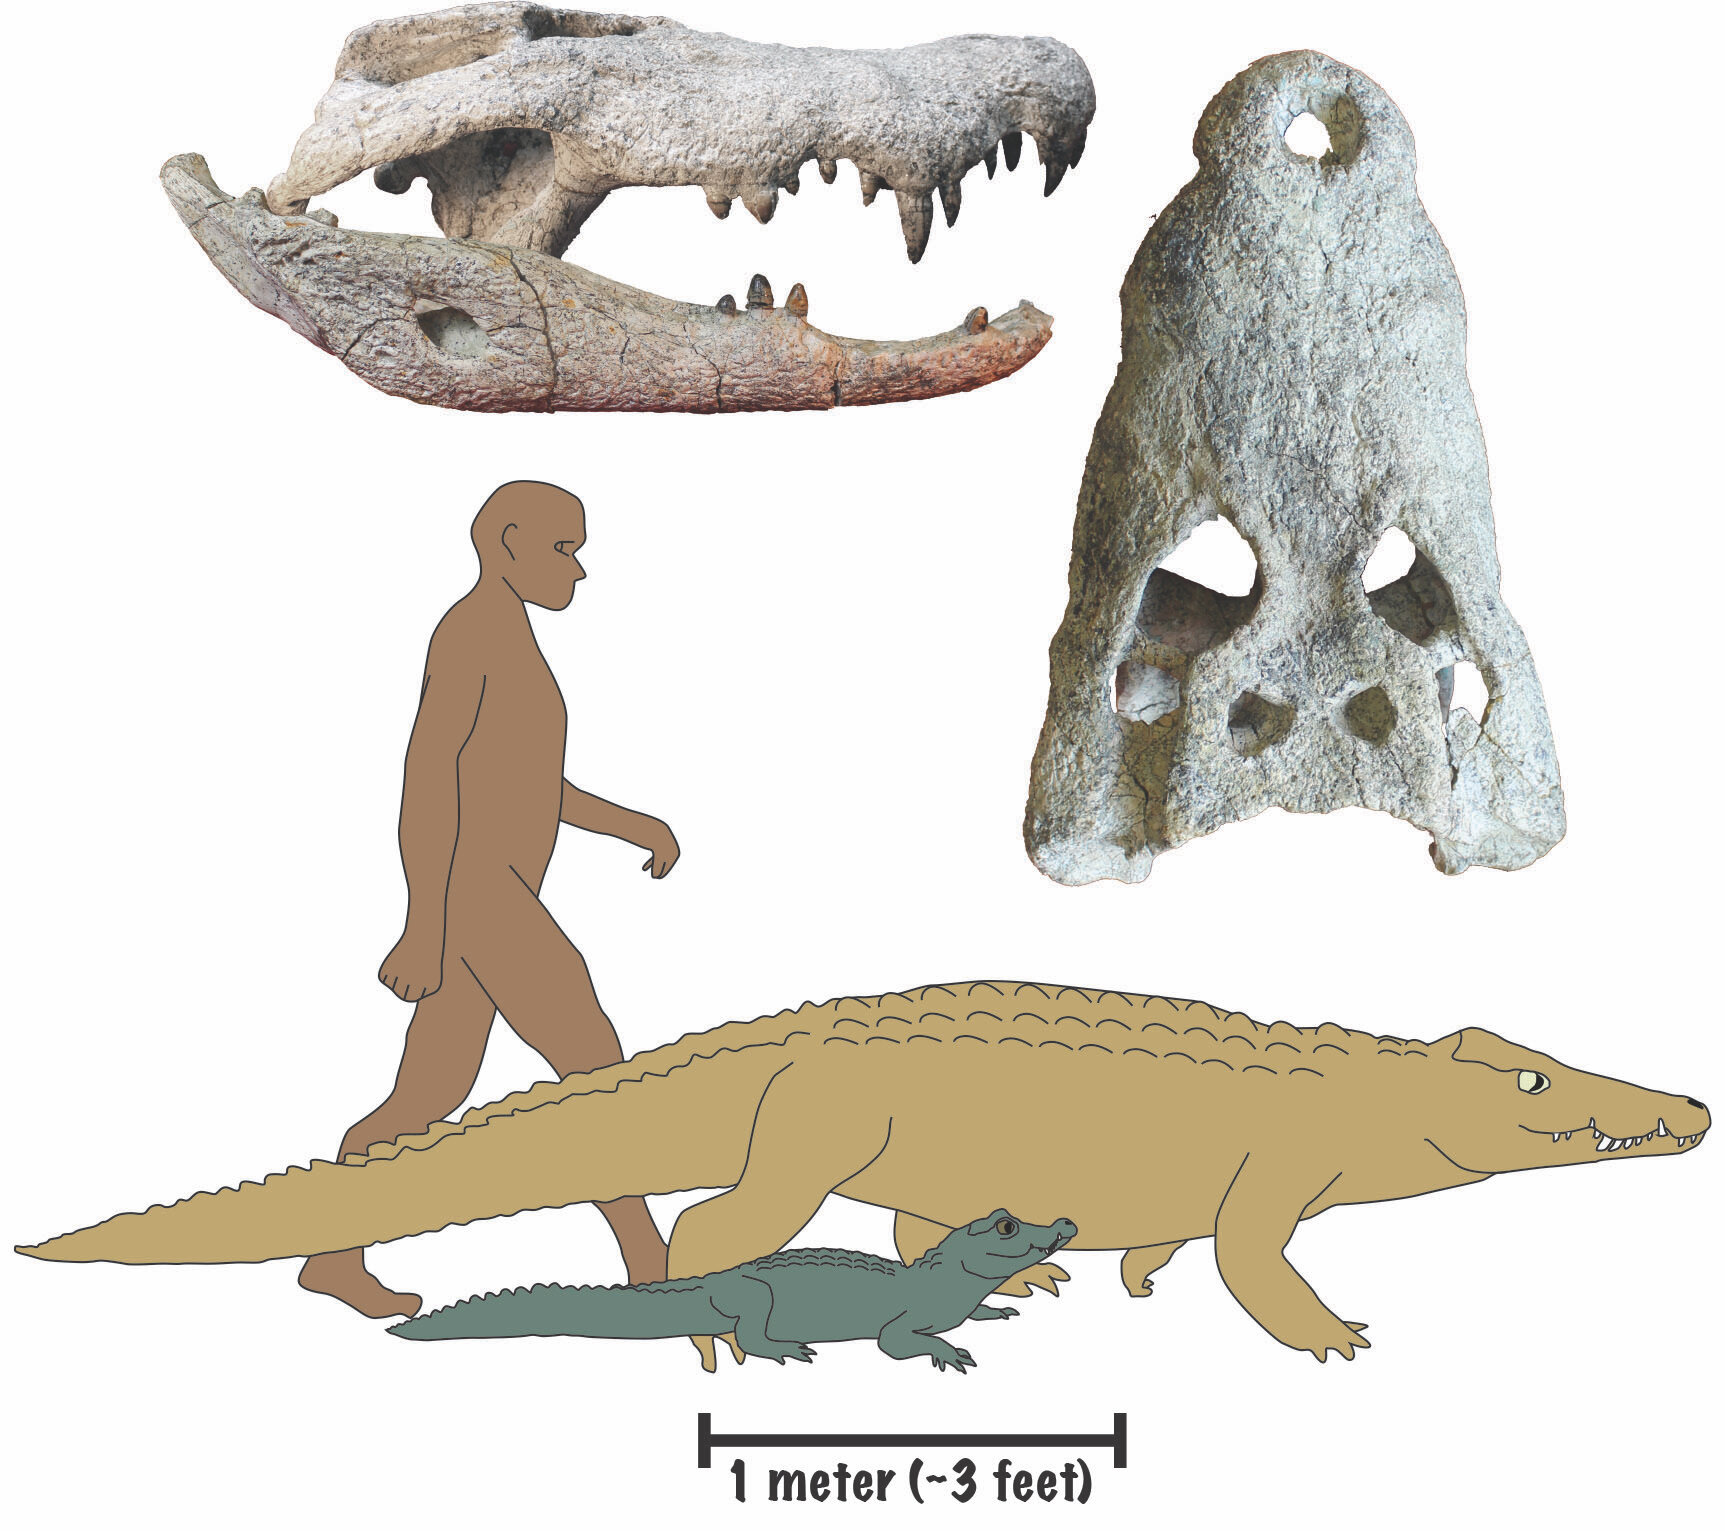 Researchers discover crocodile species that likely preyed on human ancestors